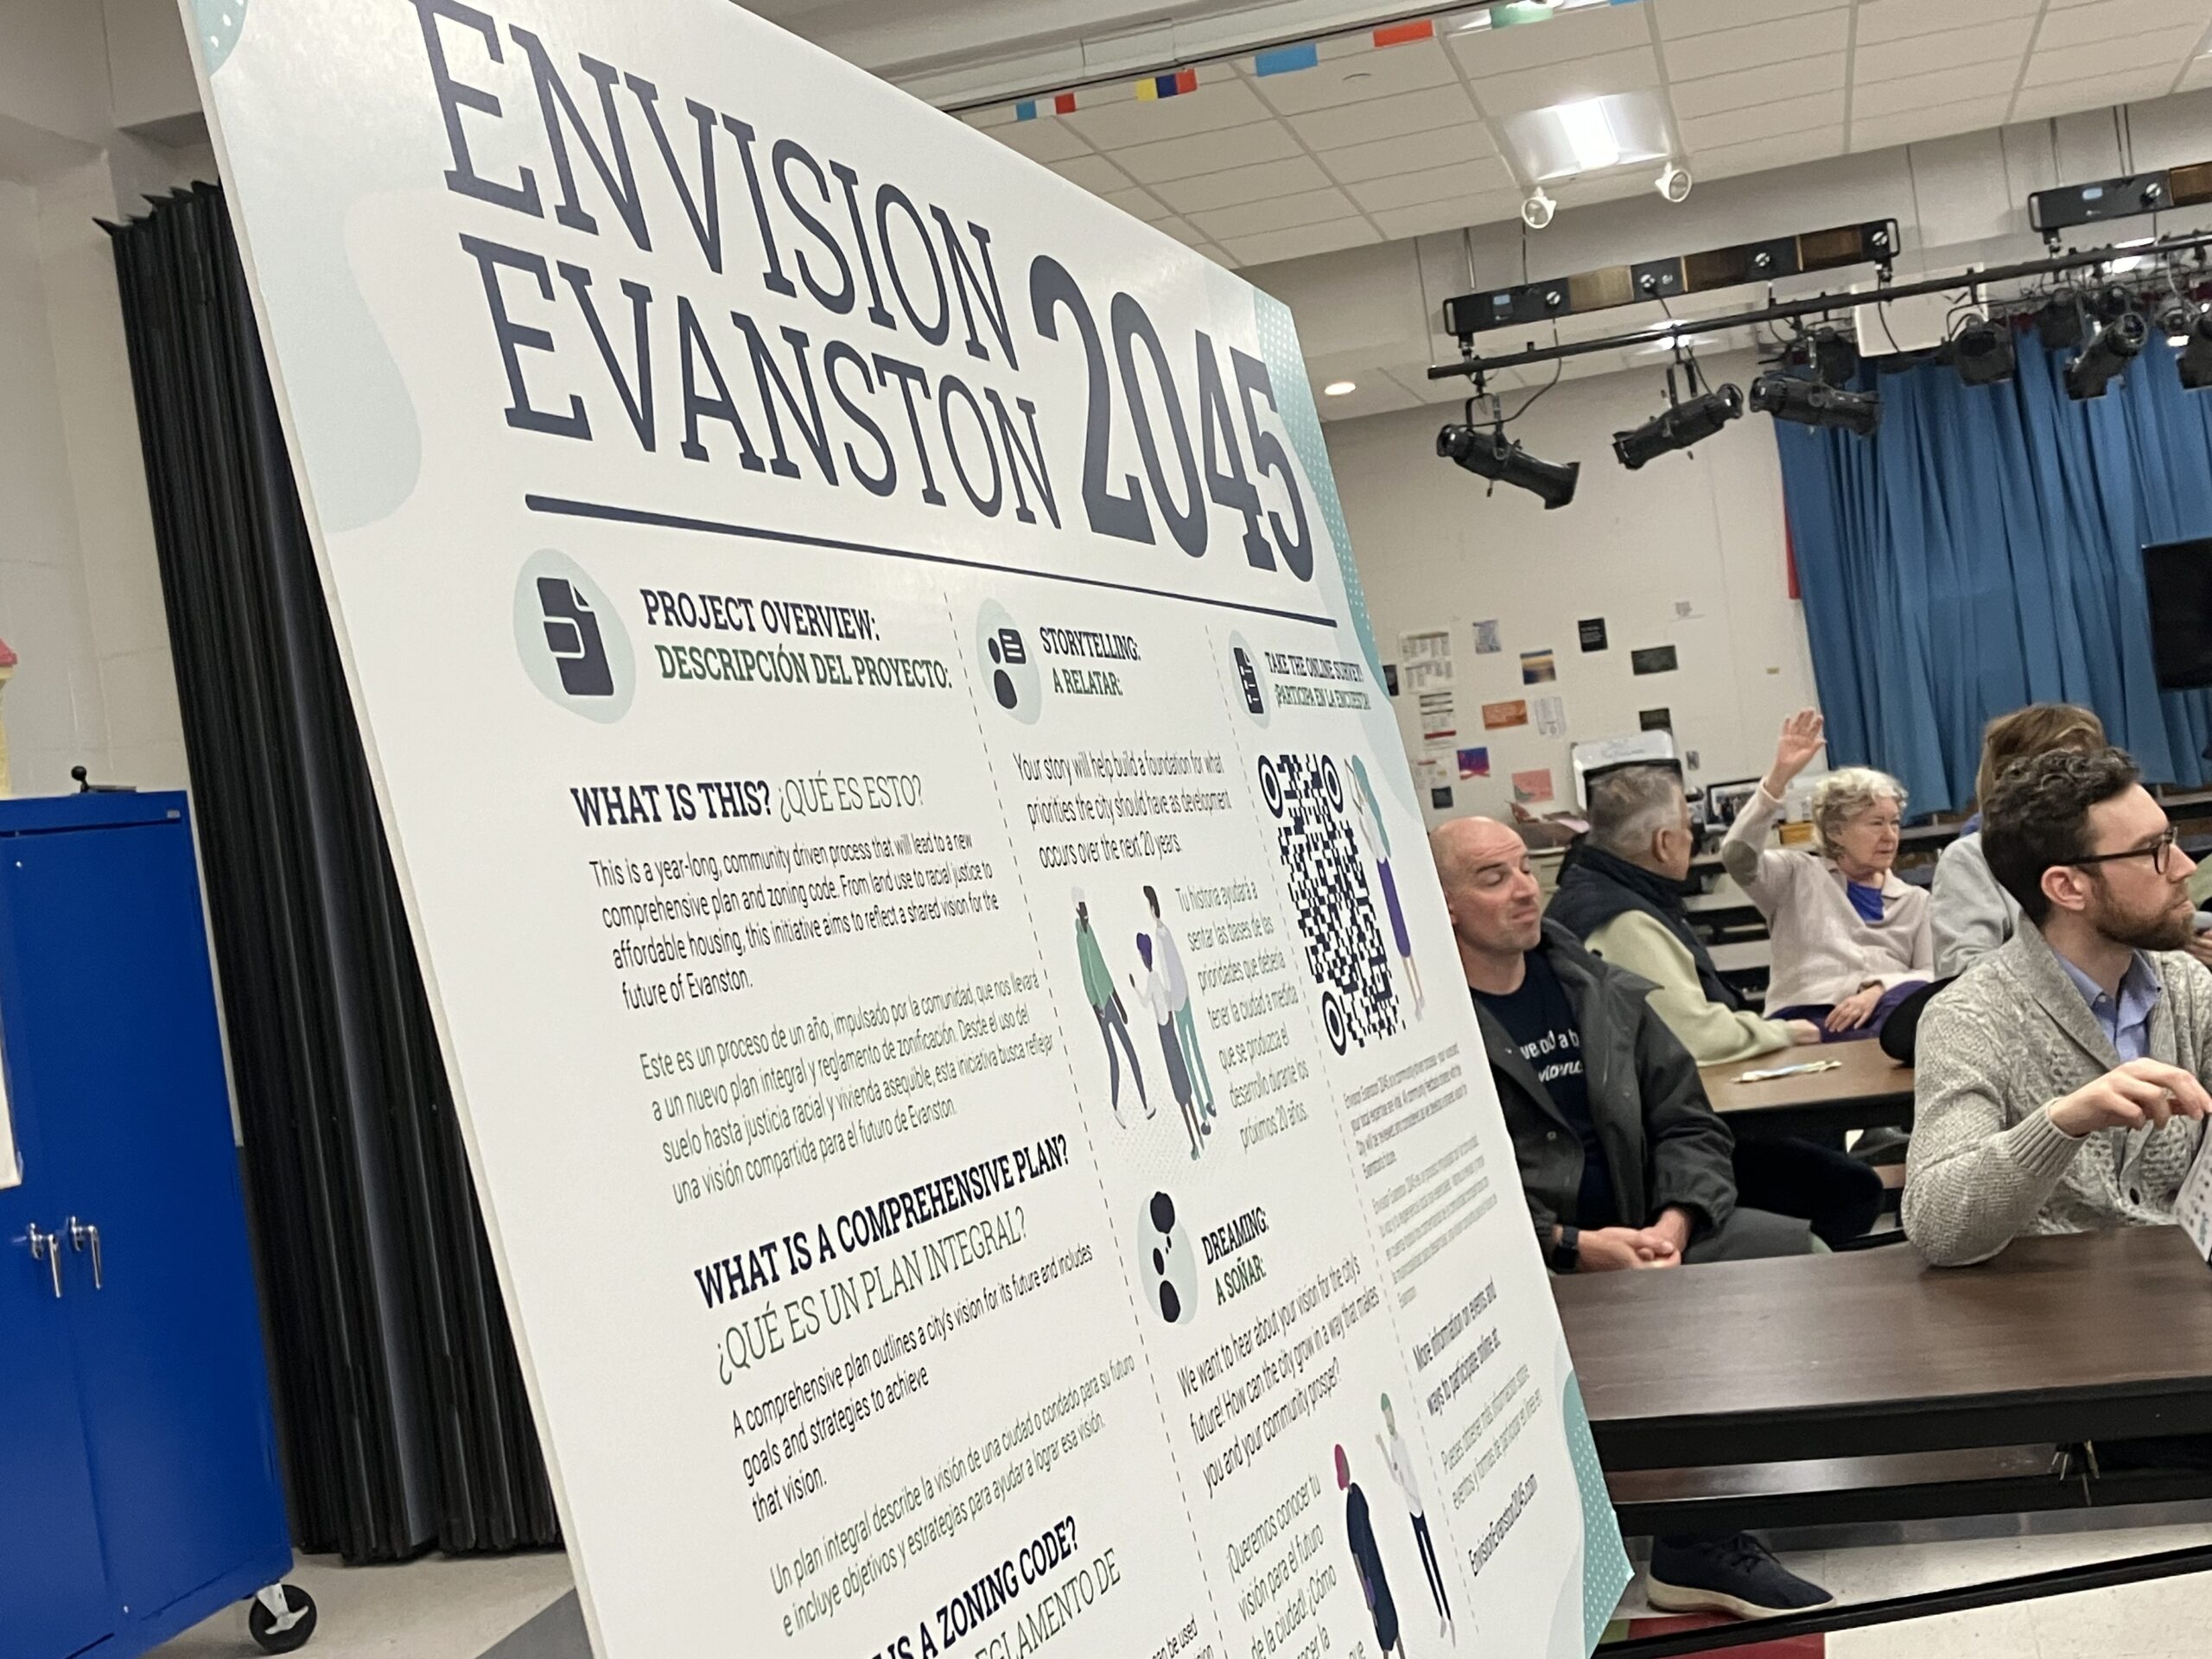 Envision Evanston 2045 off to a fast start